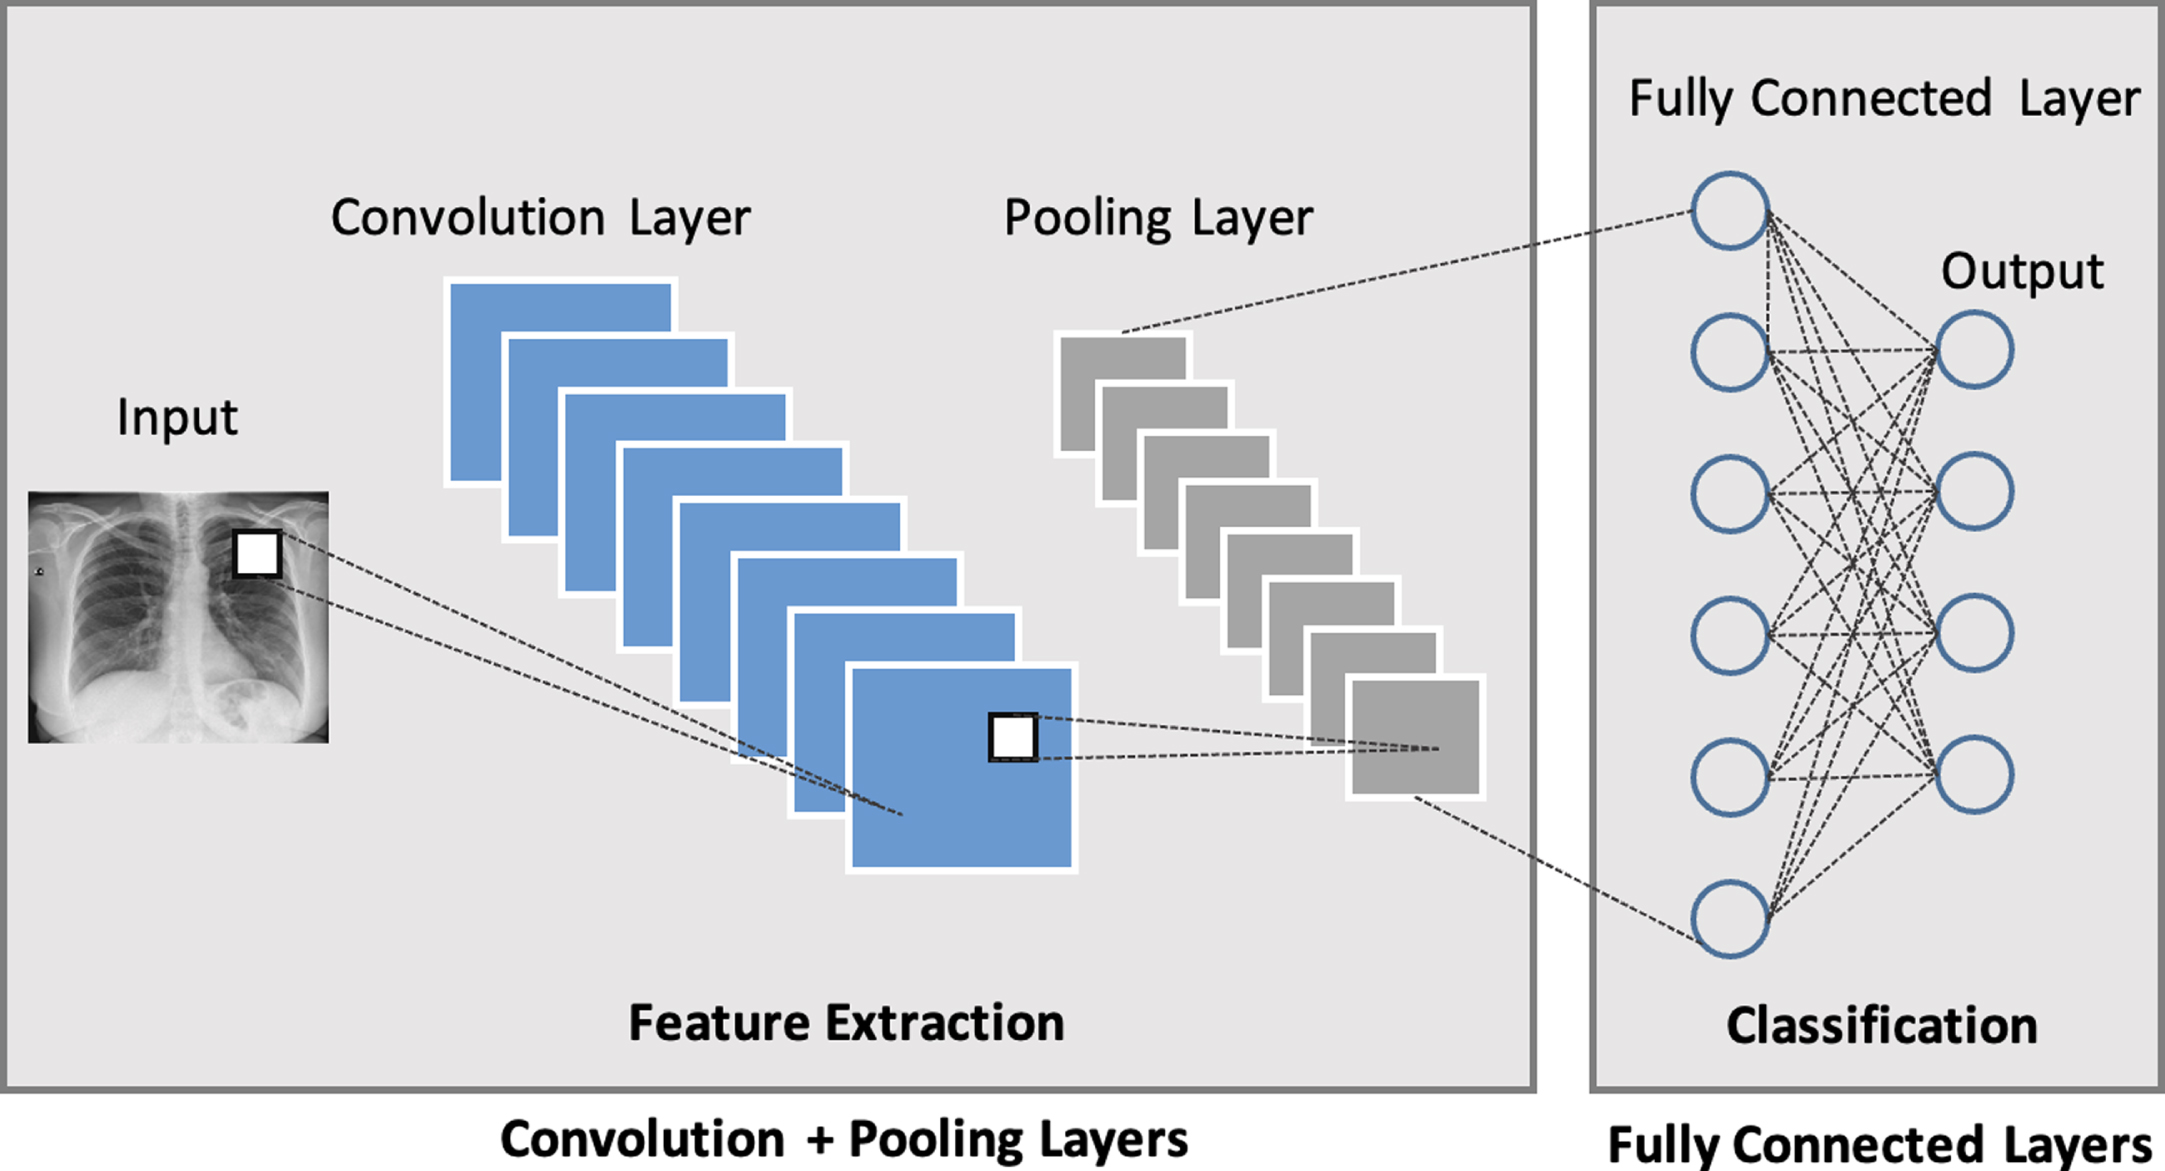 Building blocks of CNN Architecture consisting of Convolution Layer, Pooling Layer and Fully Connected Layer